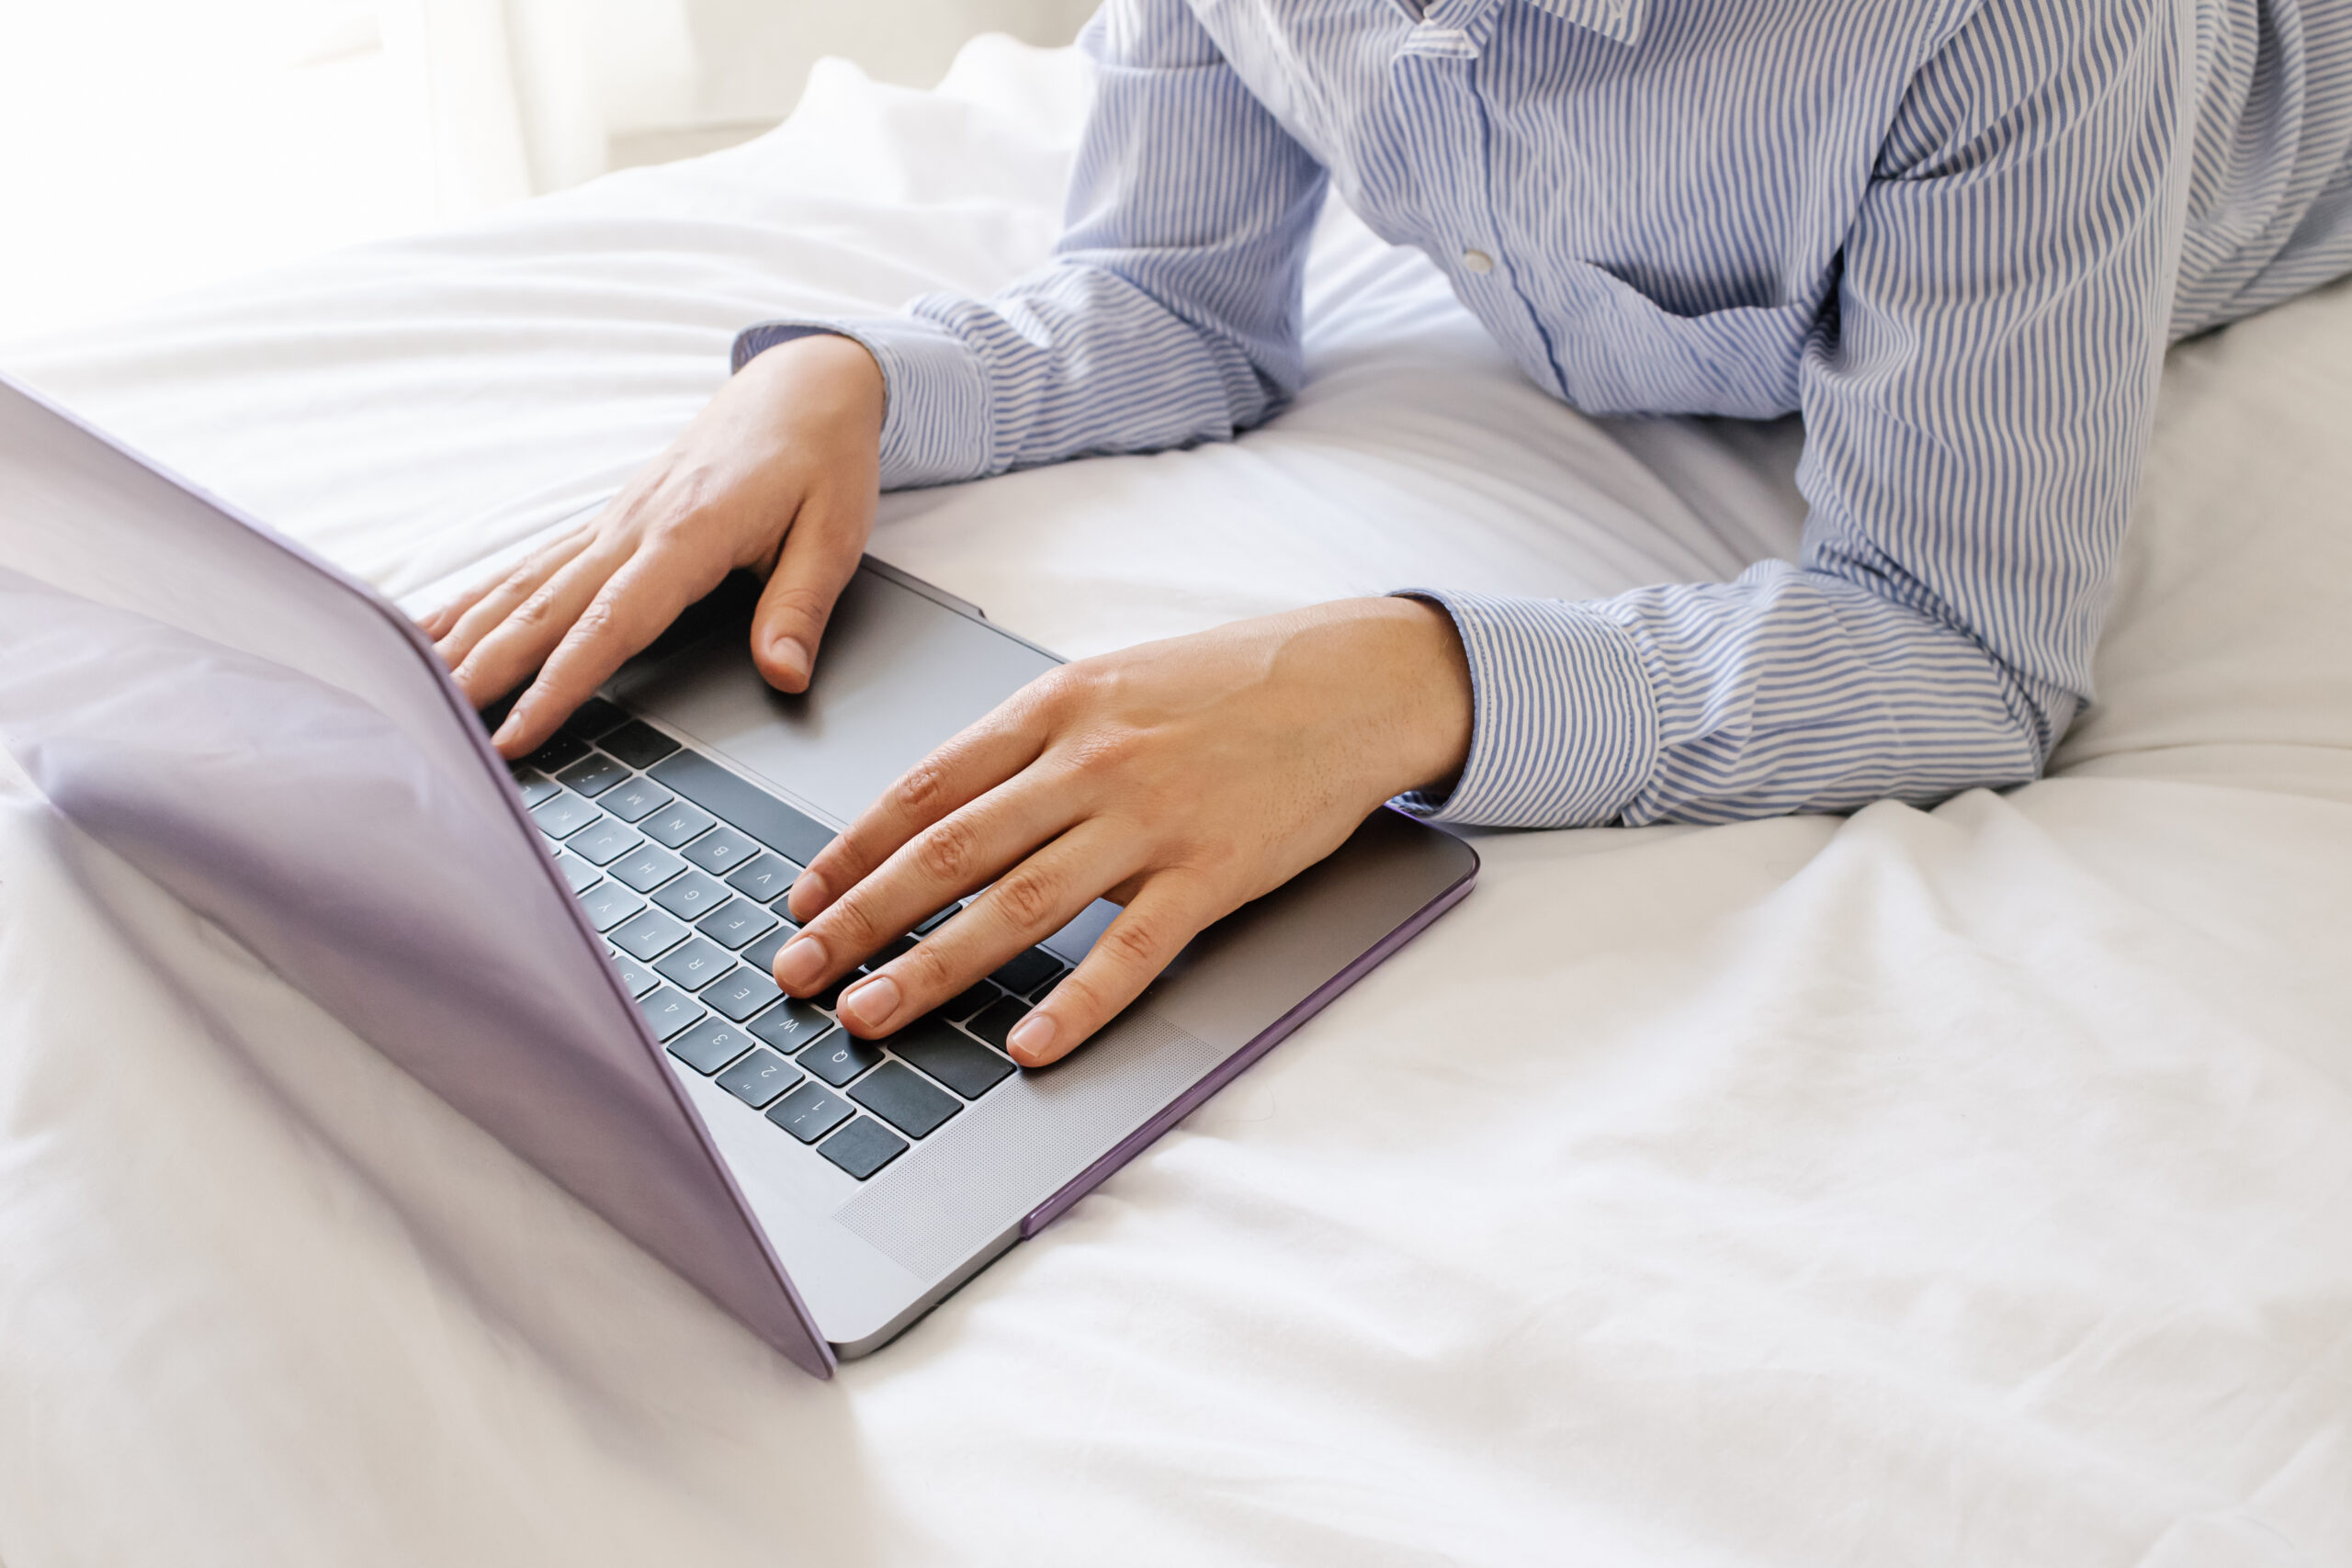 male hands use laptop keyboard and lying on bed